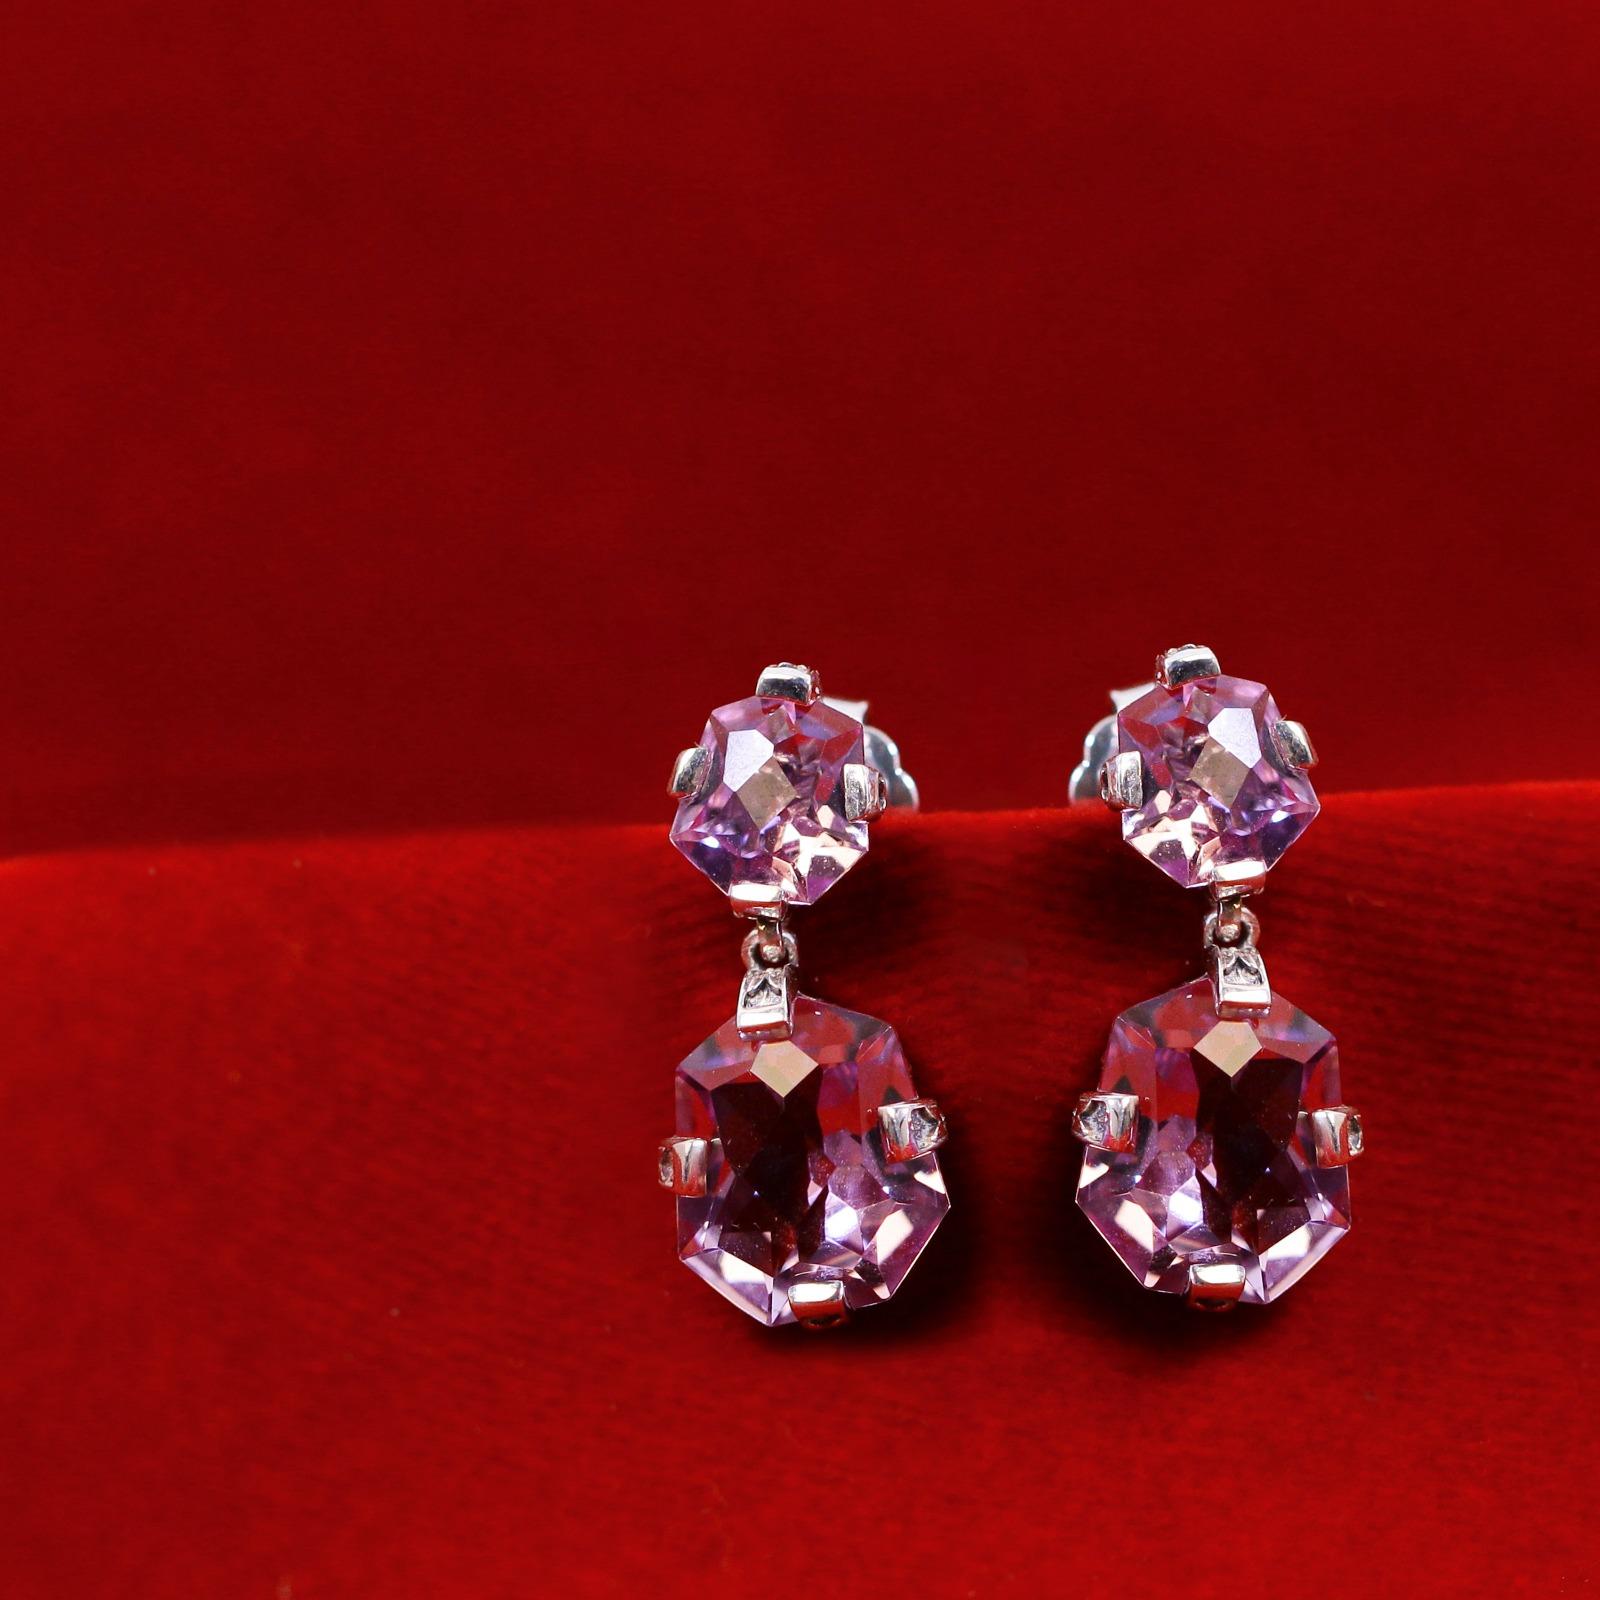 Faceted Galactical Amethyst Double Drop Earring In Sterling Silver In New Condition For Sale In Lyndhurst, NJ